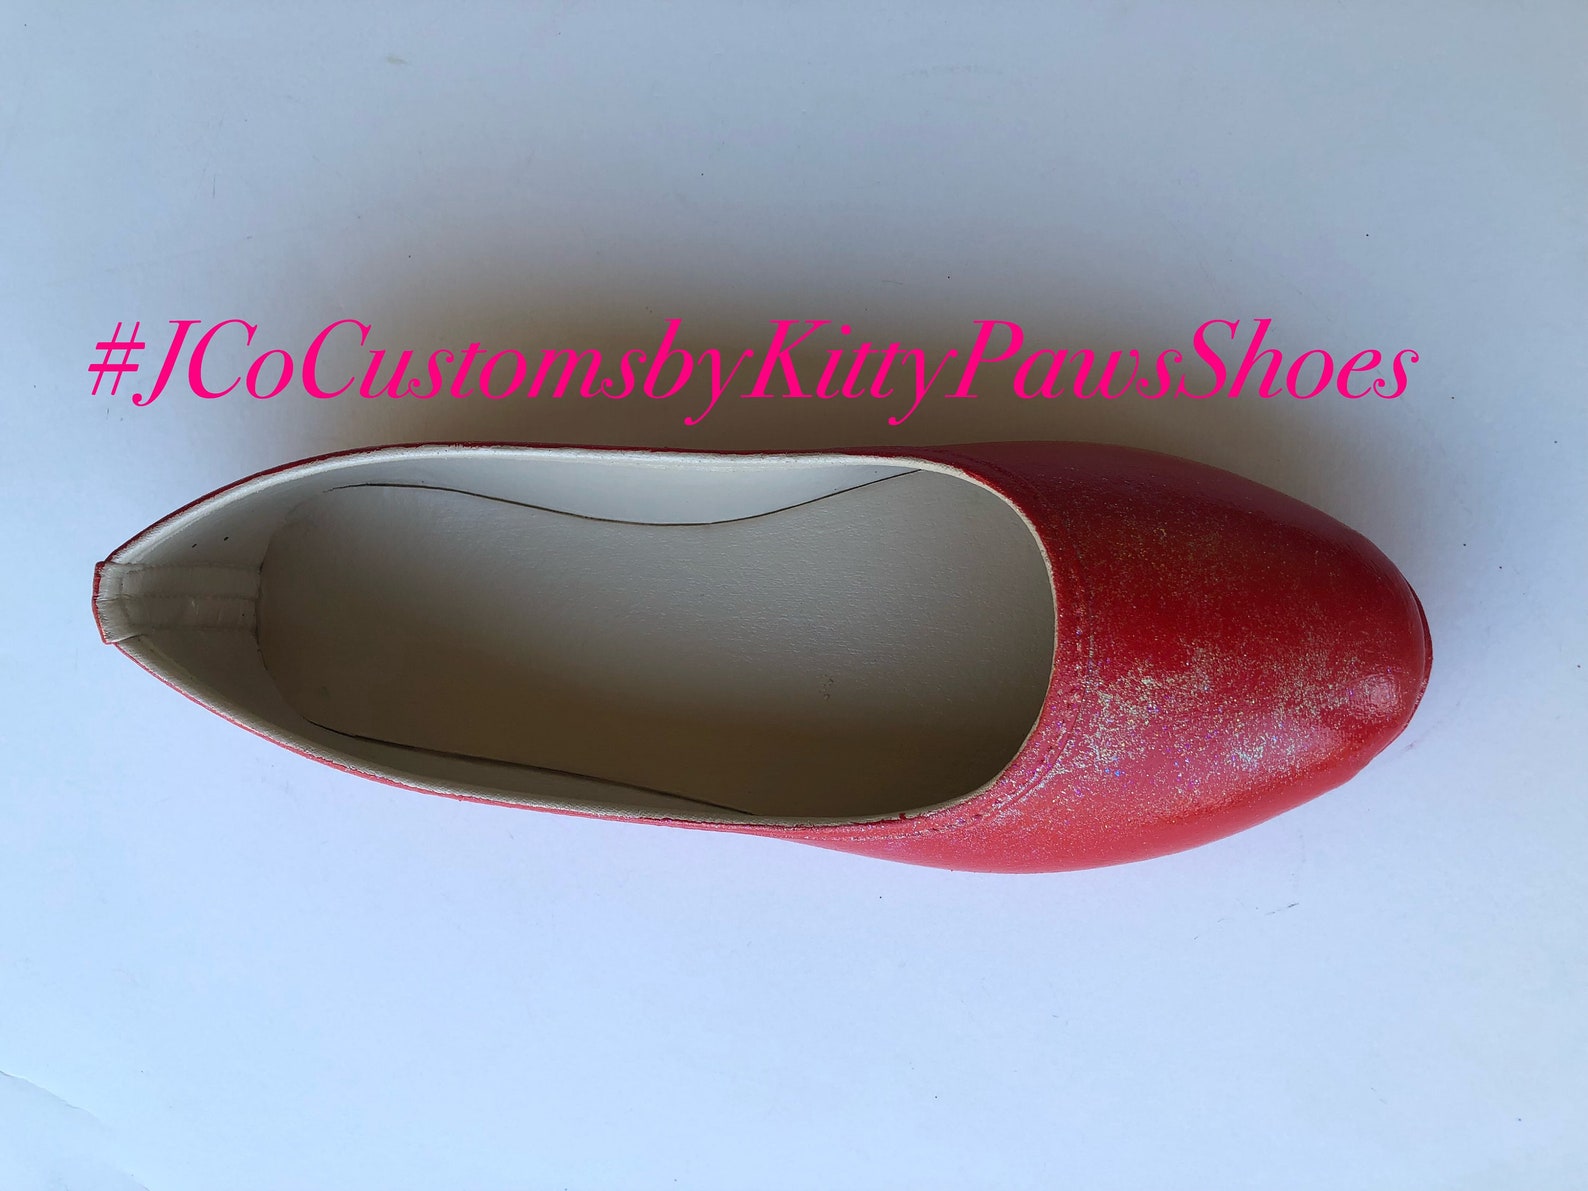 red flats women's custom ruby red shimmery bridal ballet flats *free u.s. shipping* jco.customs by kitty paws shoes